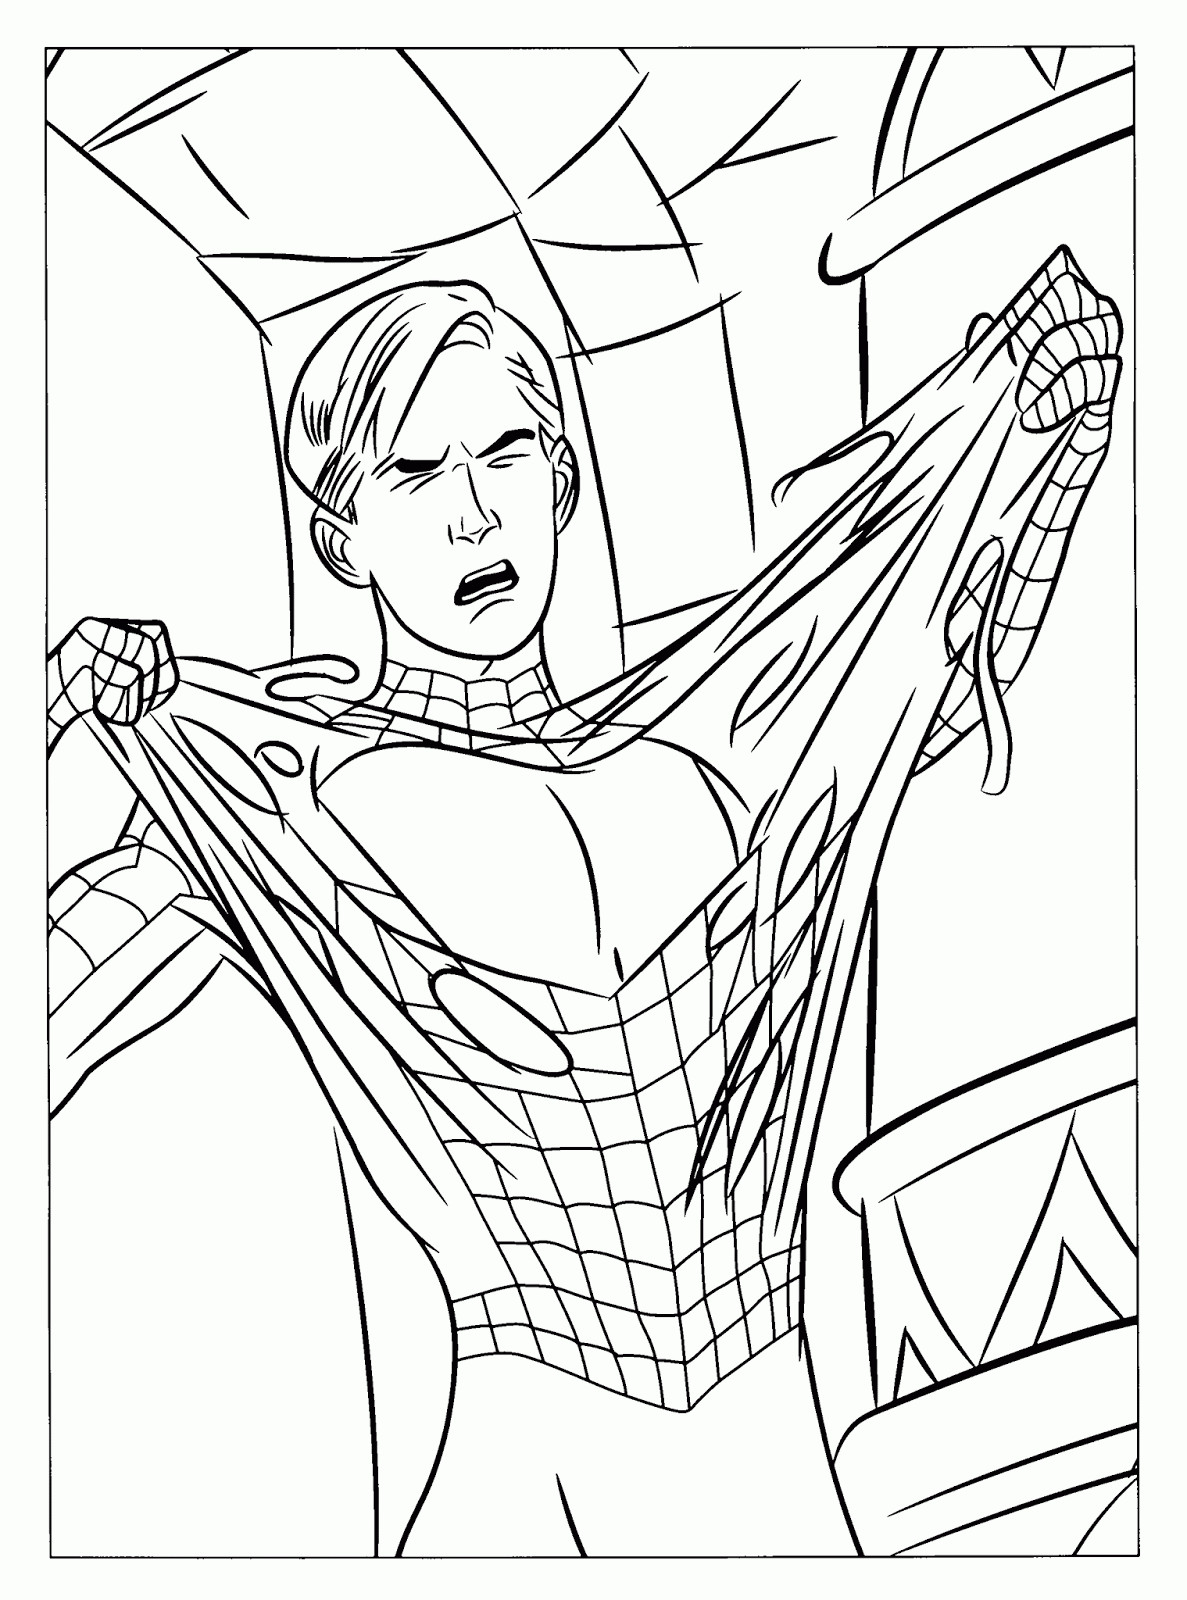 Spiderman Coloring Pages For Kids
 Coloring Pages Spiderman Free Printable Coloring Pages